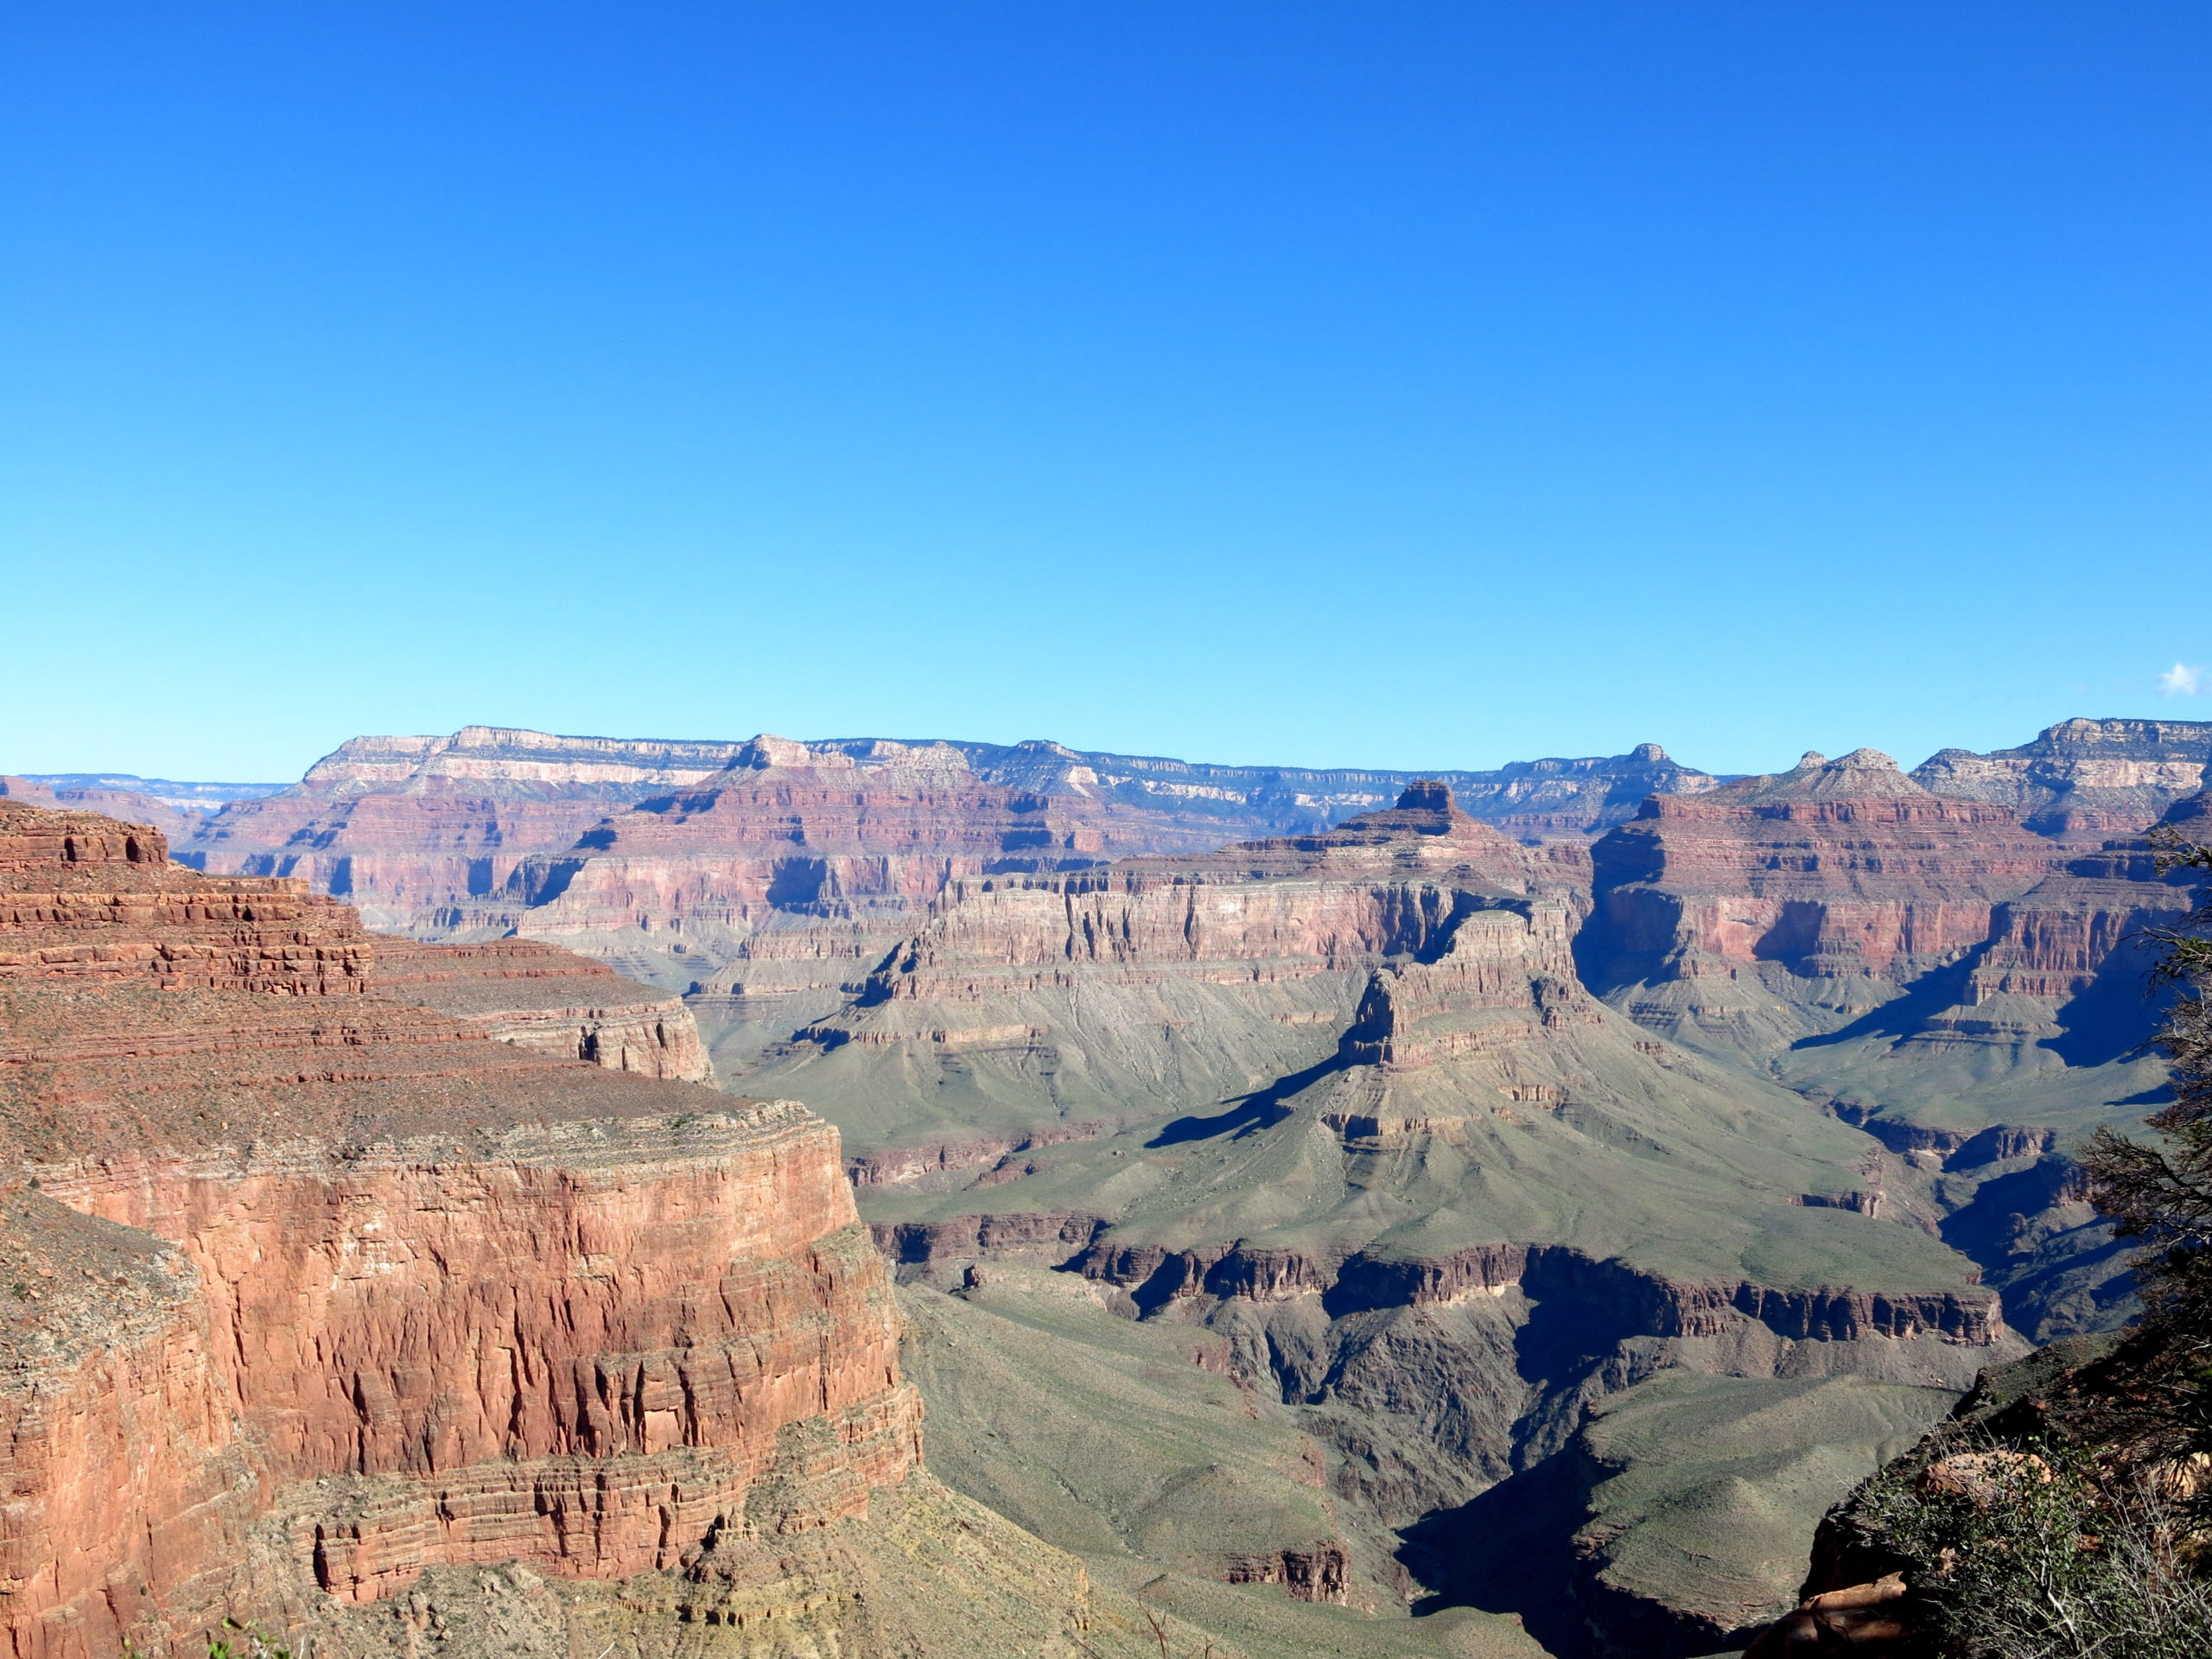 Hermit Trail, The Grand Canyon, and Desert Jesus